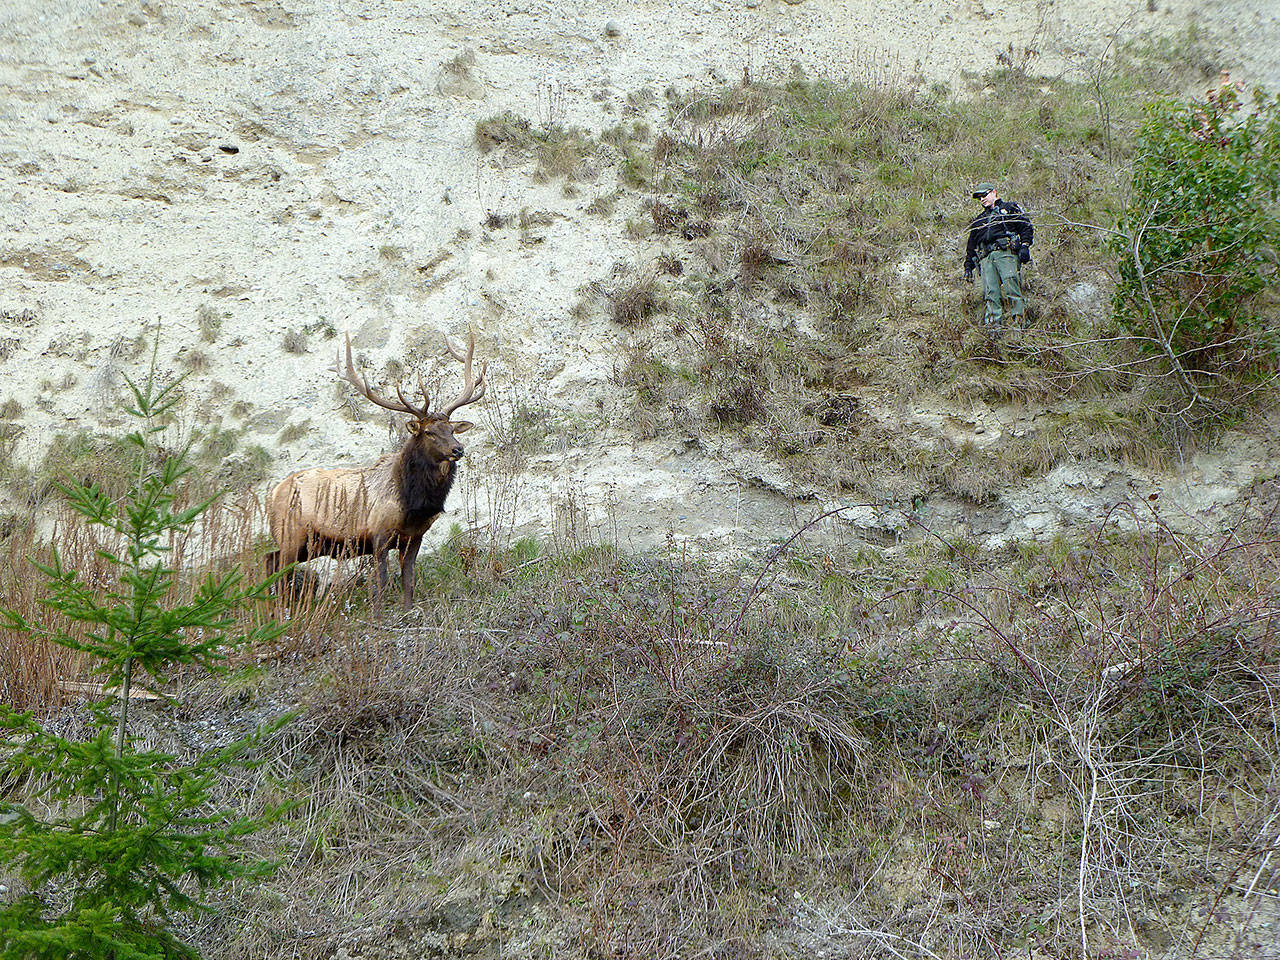 Andrew Stout, enforcement officer with the State Department of Fish and Wildlife, keeps a safe distance from Bruiser, Whidbey Island’s lone elk, while trying to shoo him away from a North Whidbey beach and back into the woods in February. Bruiser had hung around the beach for 10 days after getting tangled up in a rope swing on Super Bowl Sunday. He was tranquilized while the debris was removed but still didn’t want to leave from the beach area. Photo courtesy Washington Department of Fish and Wildlife